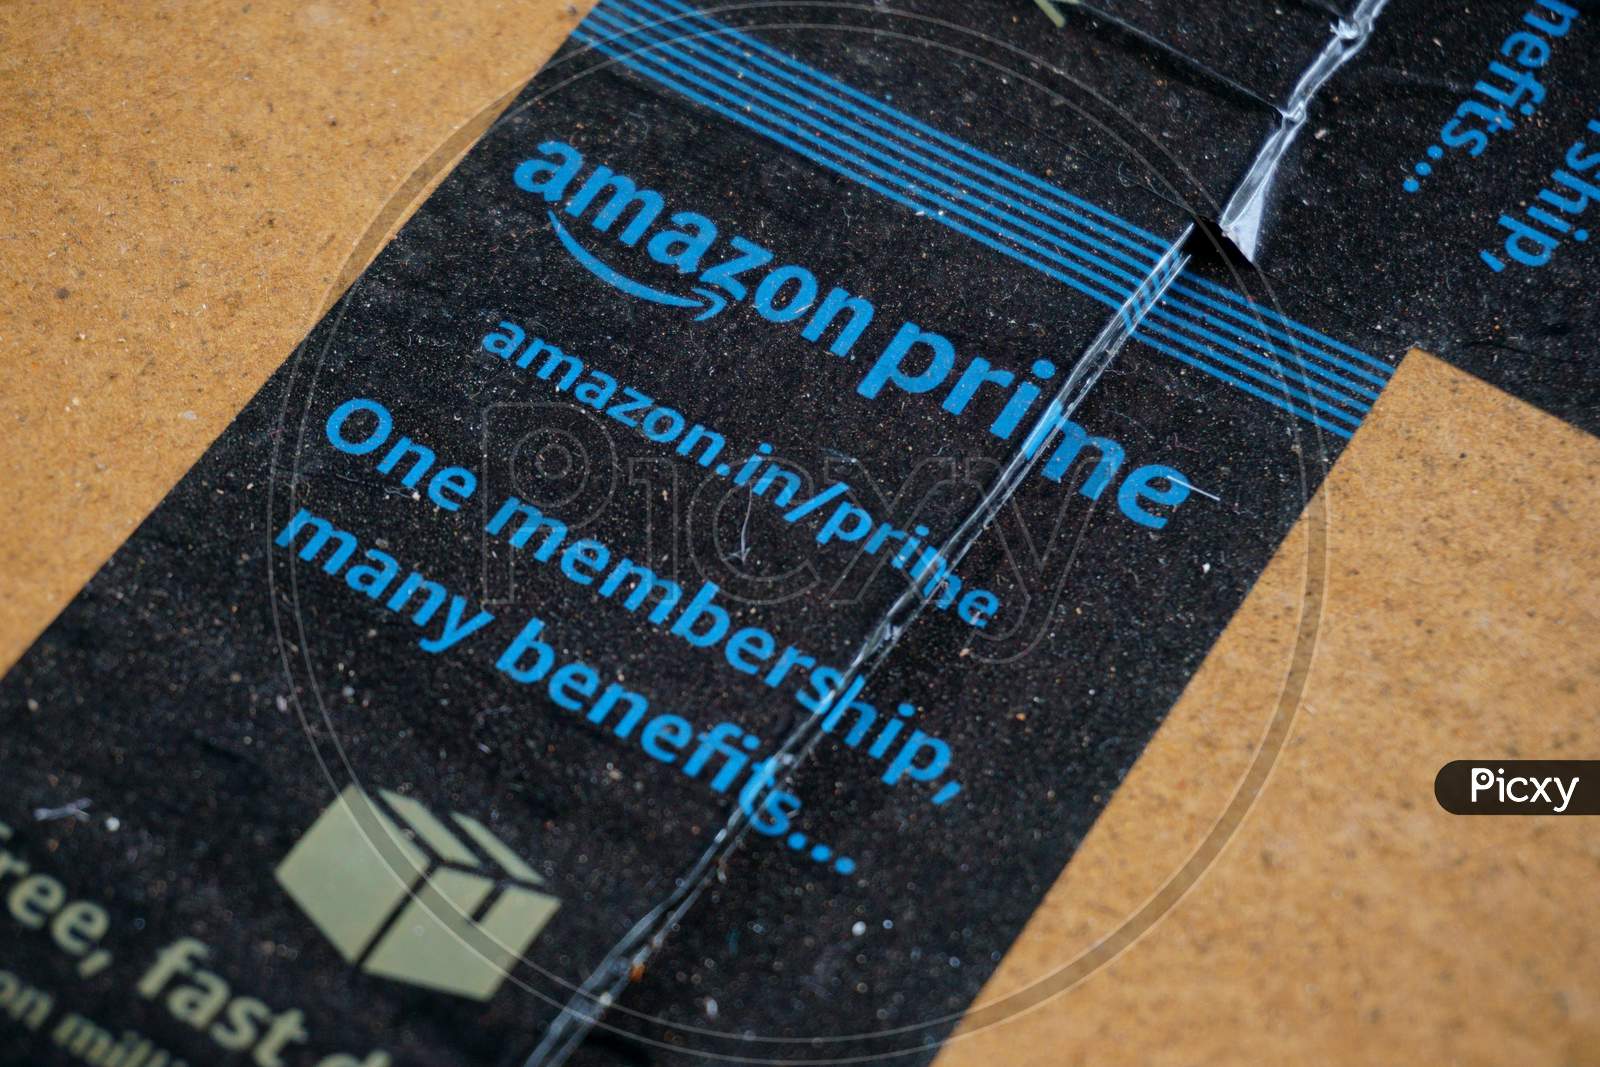 Amazon Prime Label Printed On A Corrugated Packaging Box